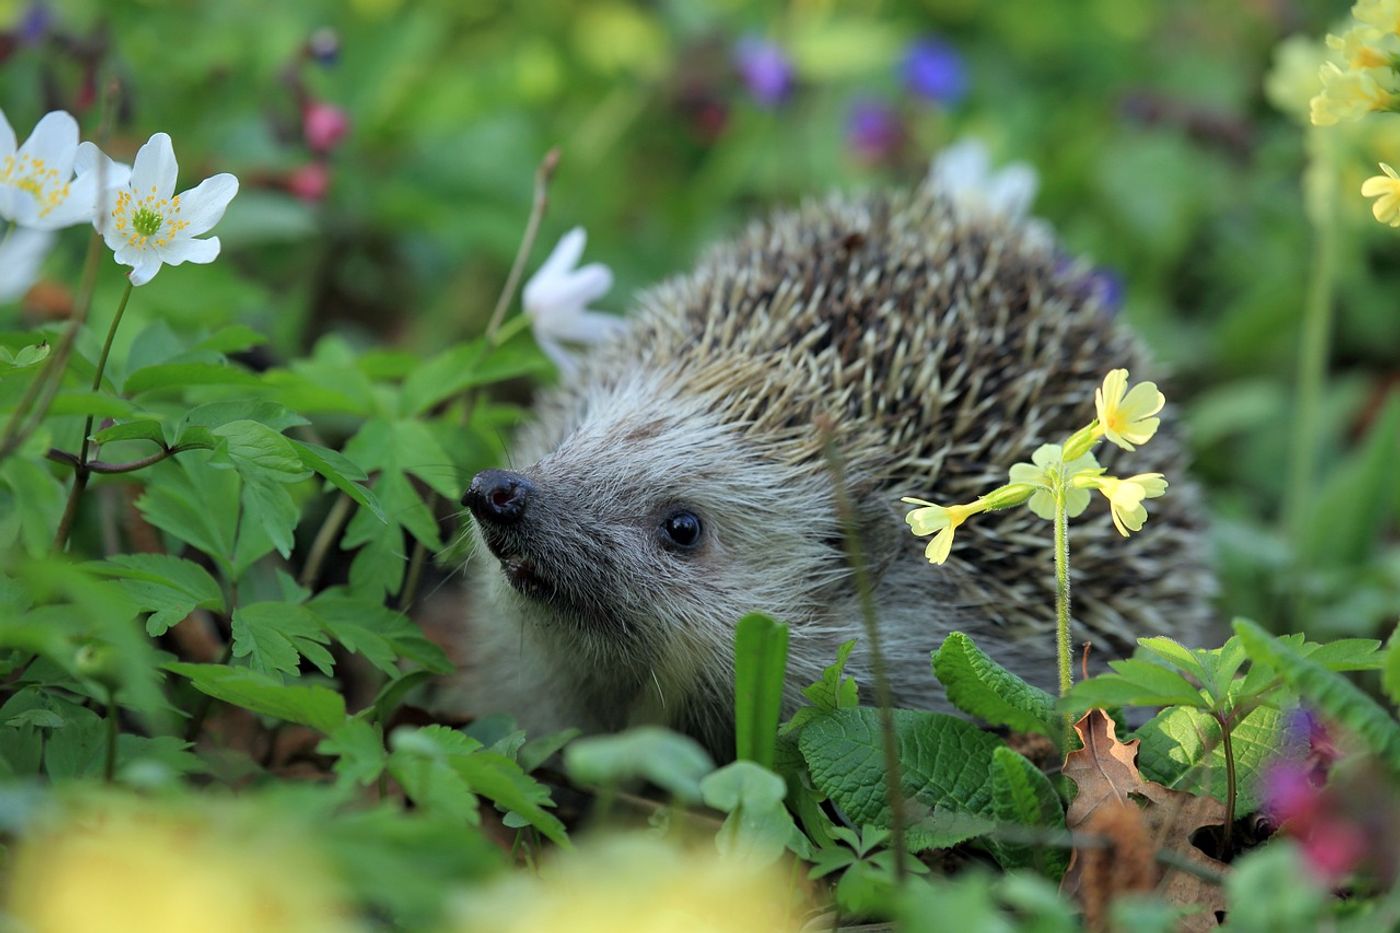 Humans could be making it harder for hedgehogs to find food and shelter in the wild.